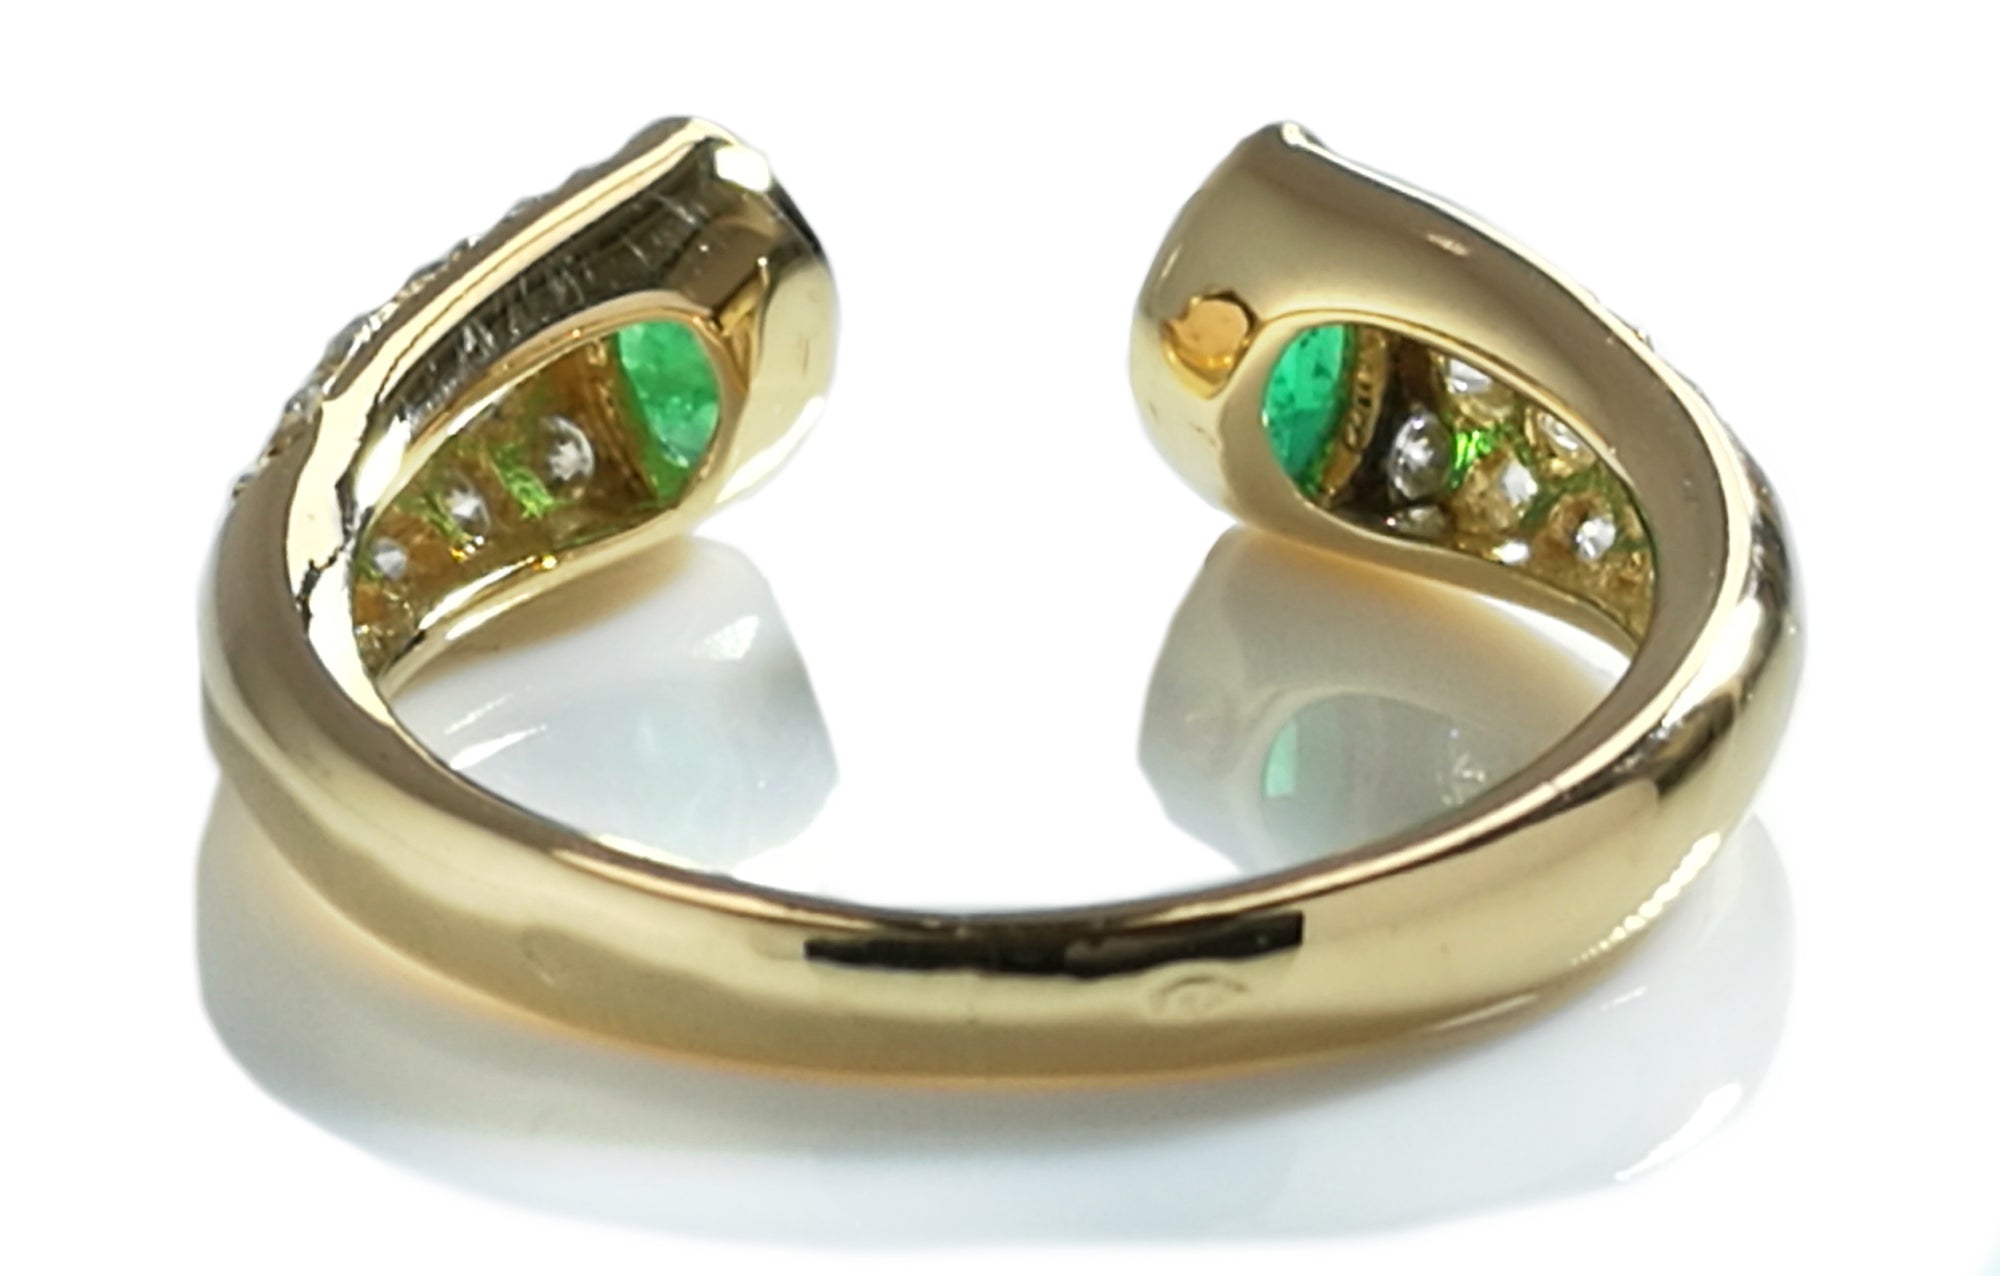 Vintage 1990s Cartier Marquise Cut Emerald, Diamond Pave & 18k Gold Open Ring